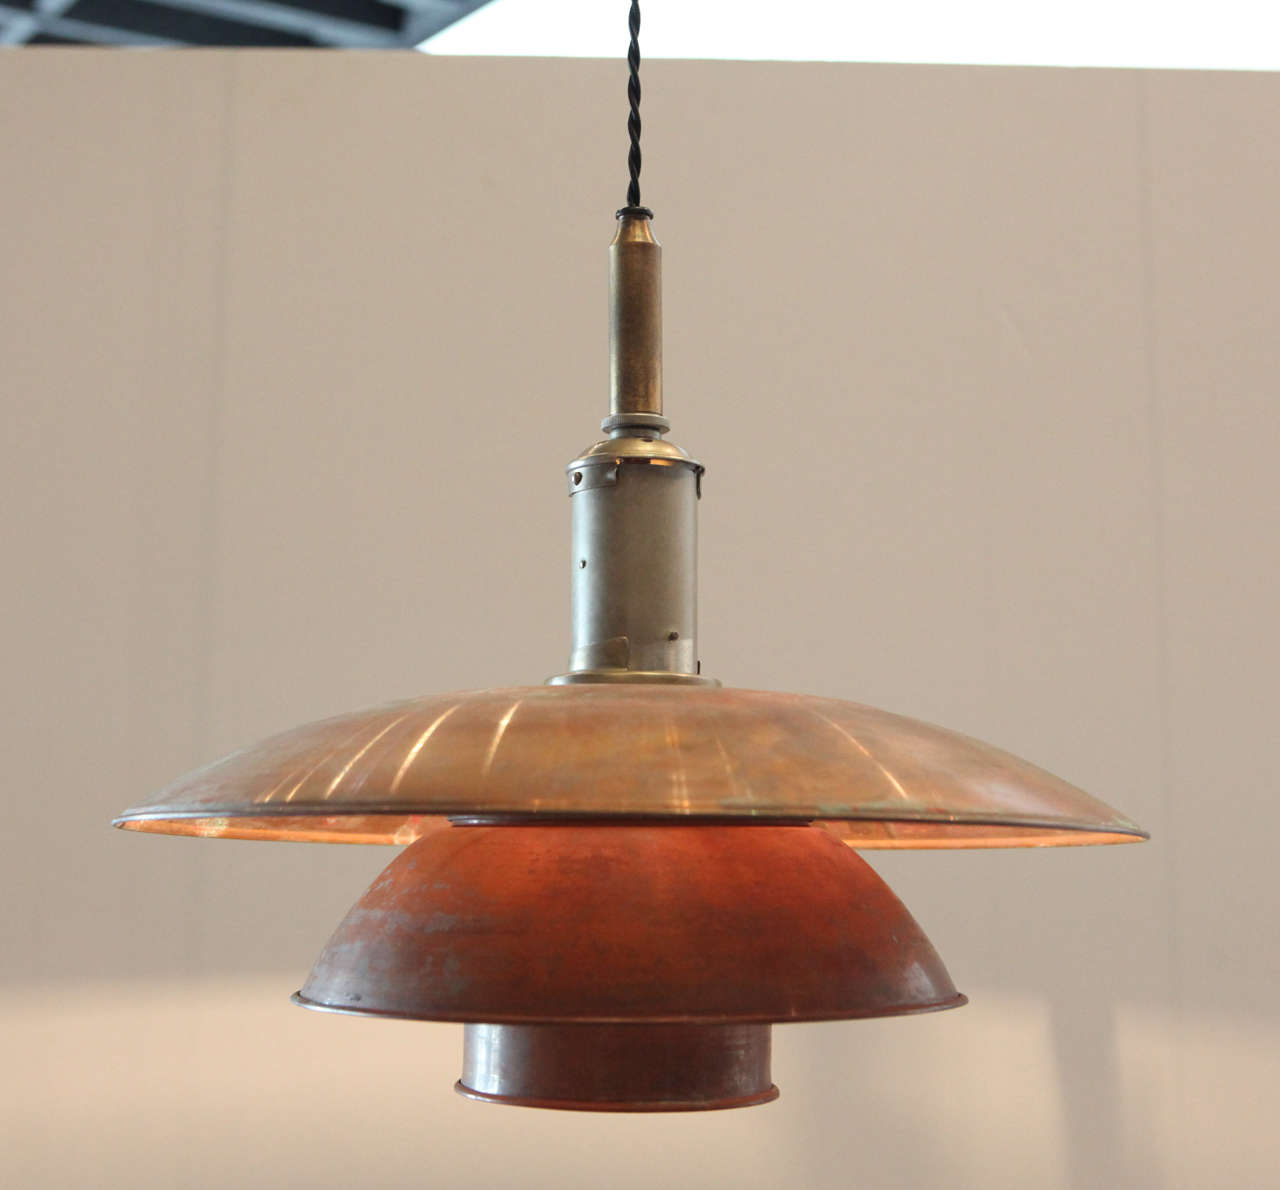 poul henningsen's iconic design in copper , produced in the late 1920's with designer's & patent stamp to underneath.